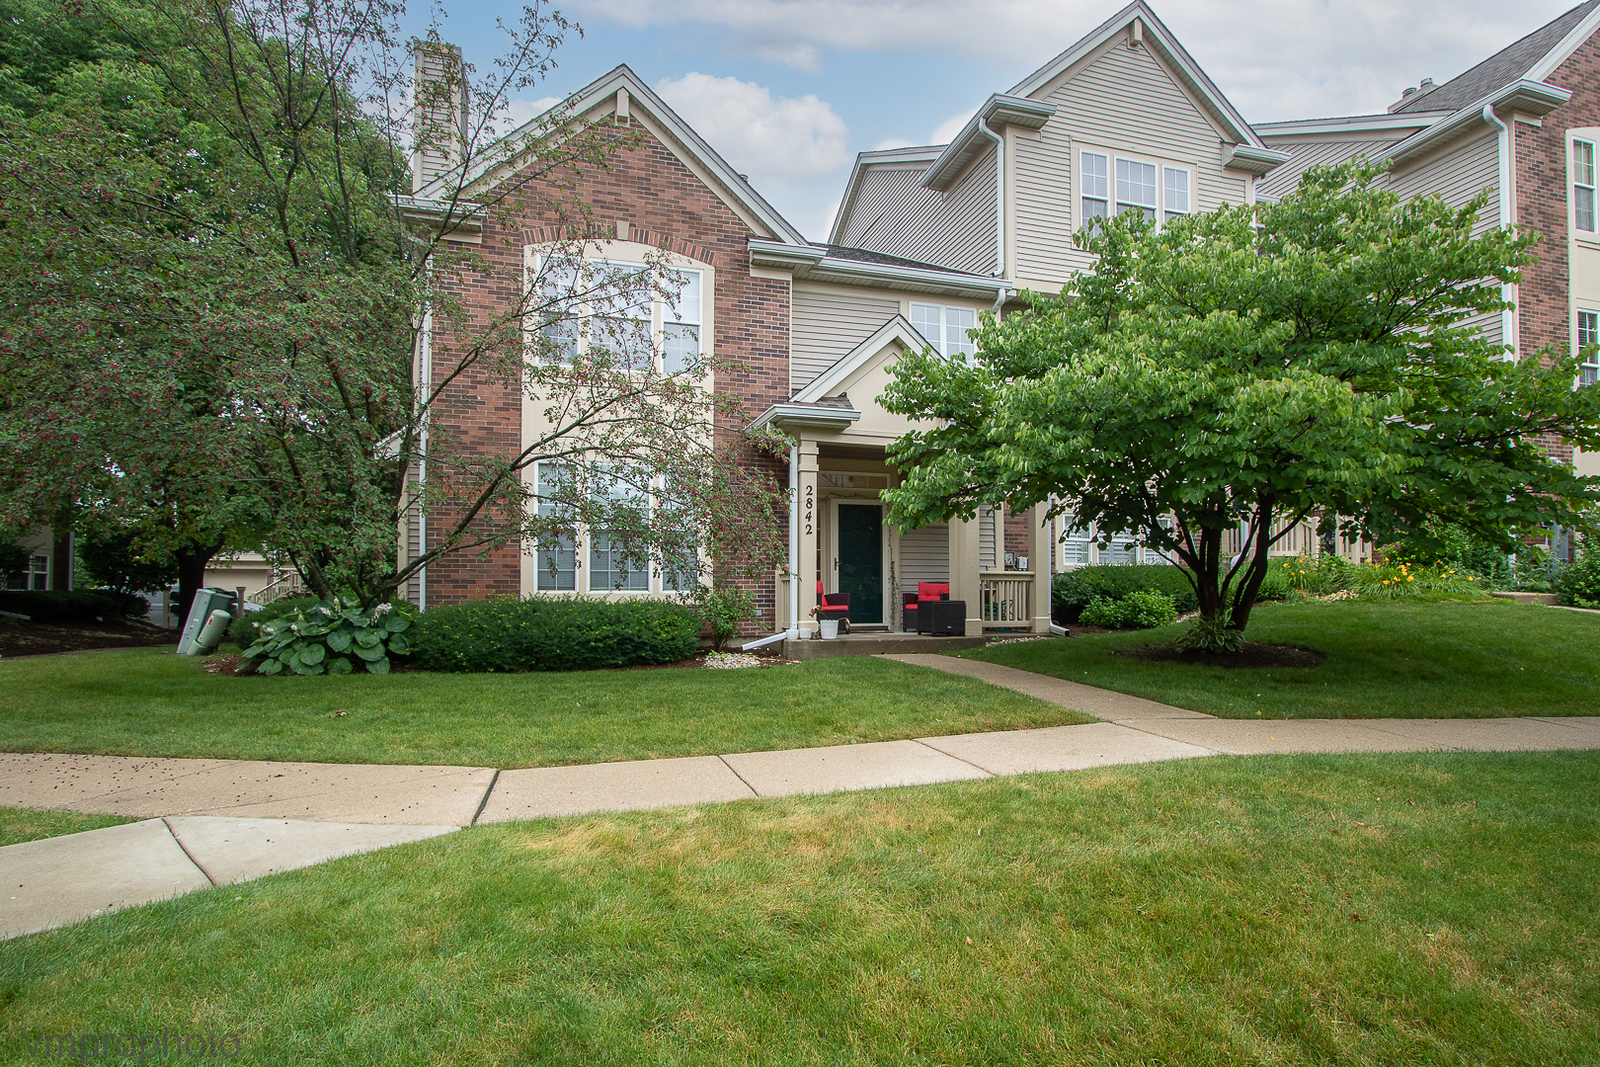 View Arlington Heights, IL 60004 townhome